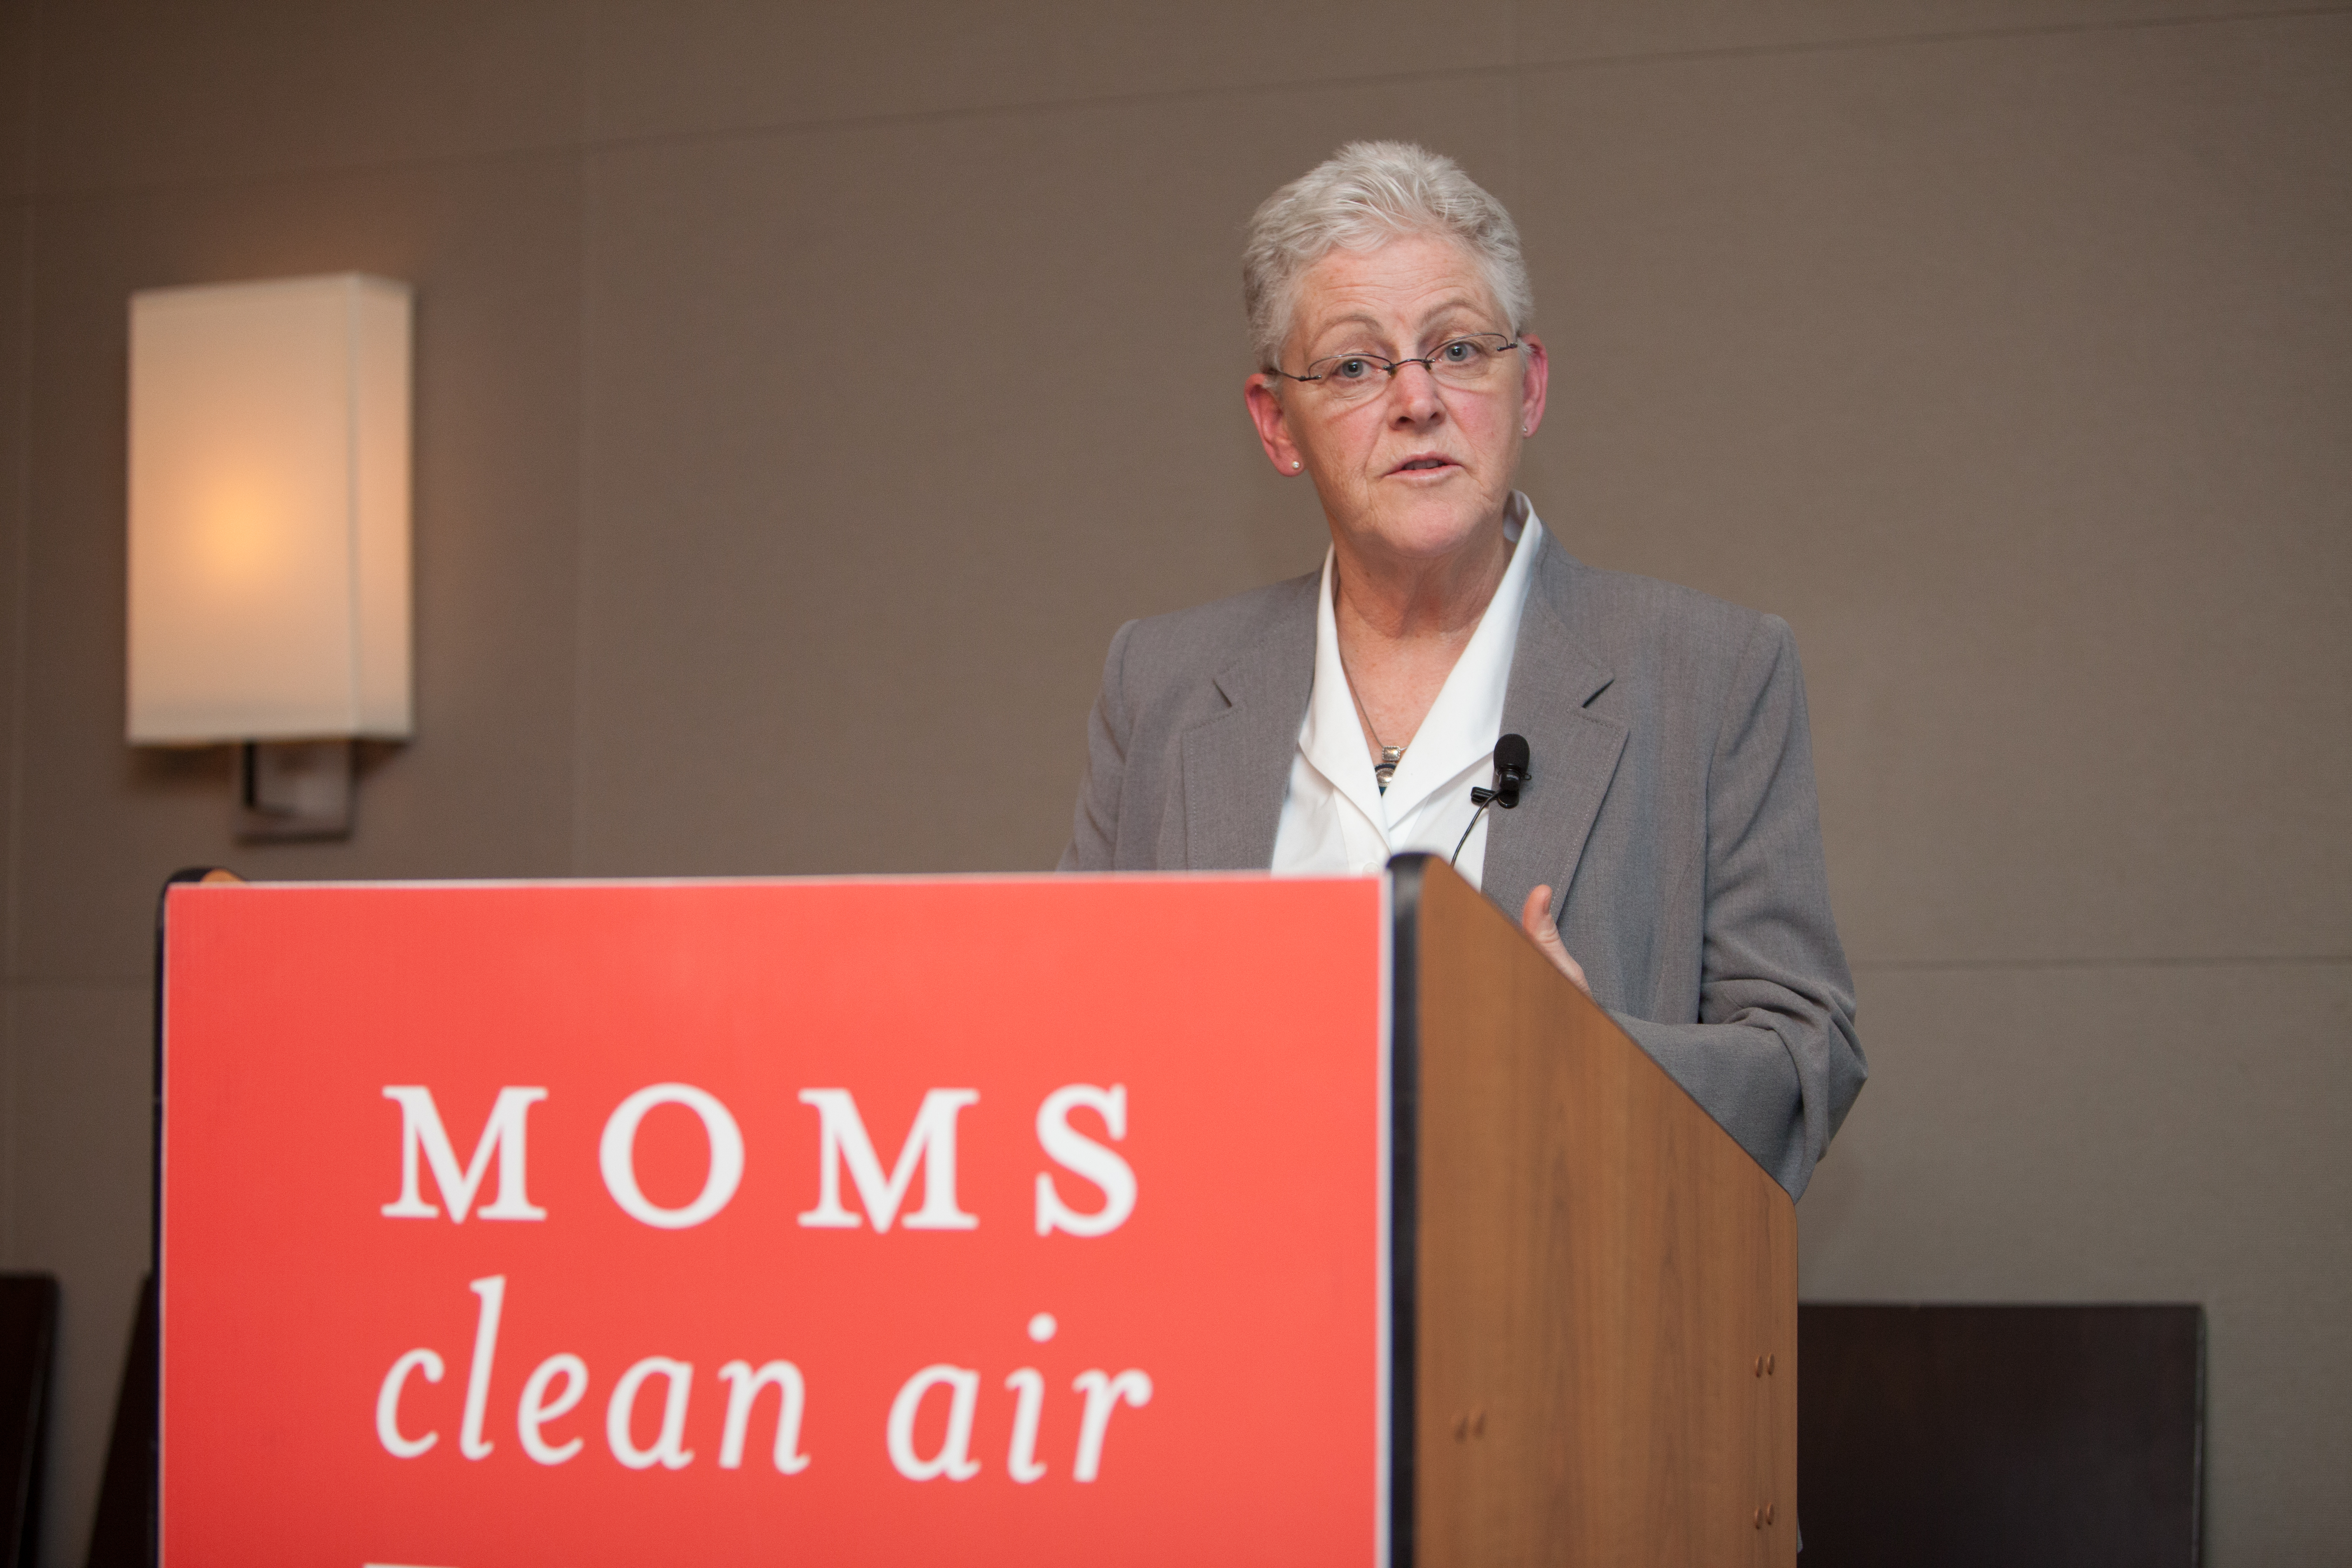 In celebration of Women's History Month, Moms Clean Air Force in conjunction with the National Wildlife Federation organized a reception in Washington, DC honoring one woman who stands out as a continual source of inspiration when it comes to protecting public health and the environment: Gina McCarthy, Administrator for the Environmental Protection Agency (EPA). Groovy Green Livin